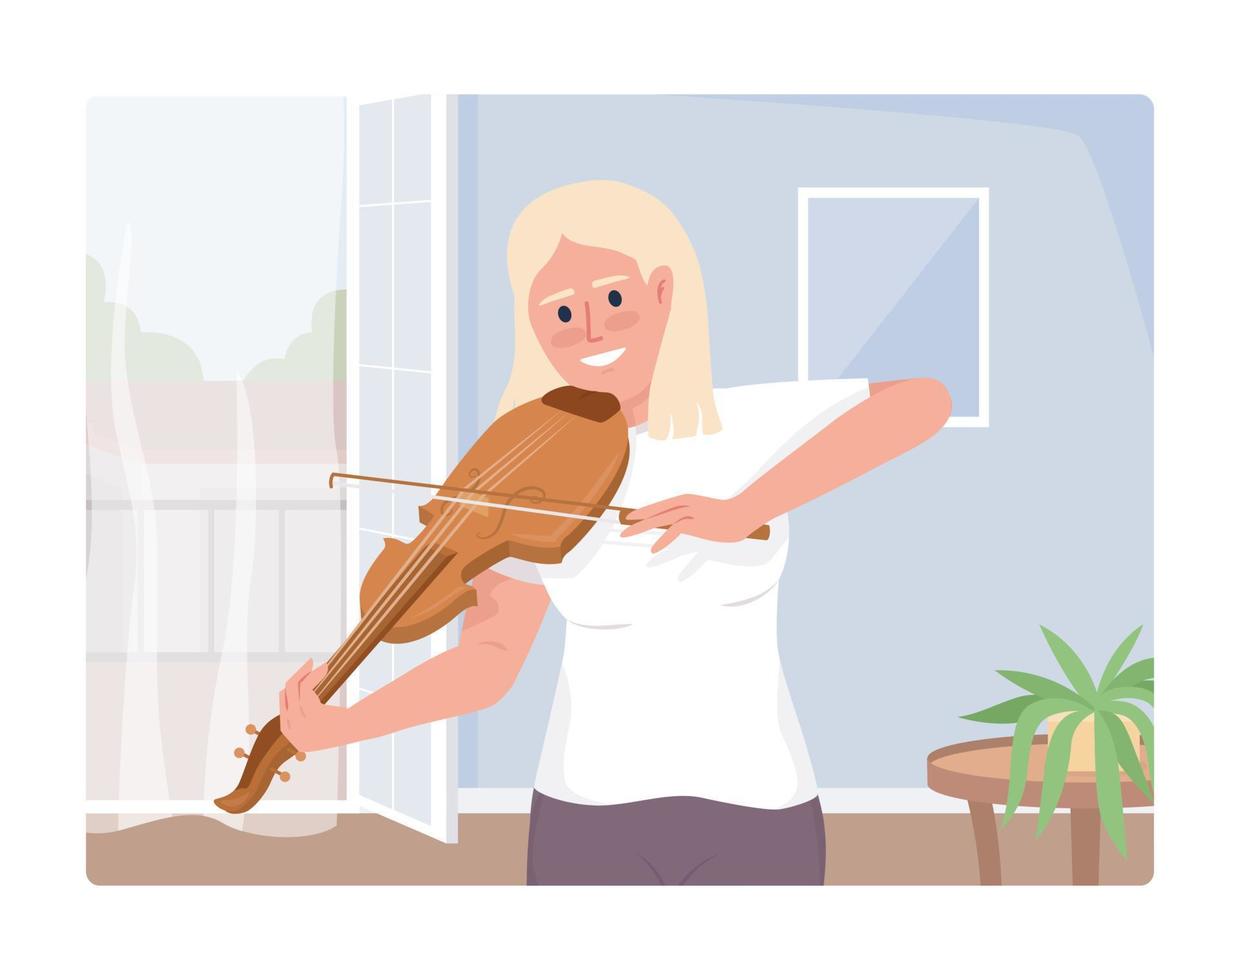 Violin lessons hobby 2D vector isolated illustration. Excited blond woman playing instrument with bow flat character on cartoon background. Colorful editable scene for mobile, website, presentation